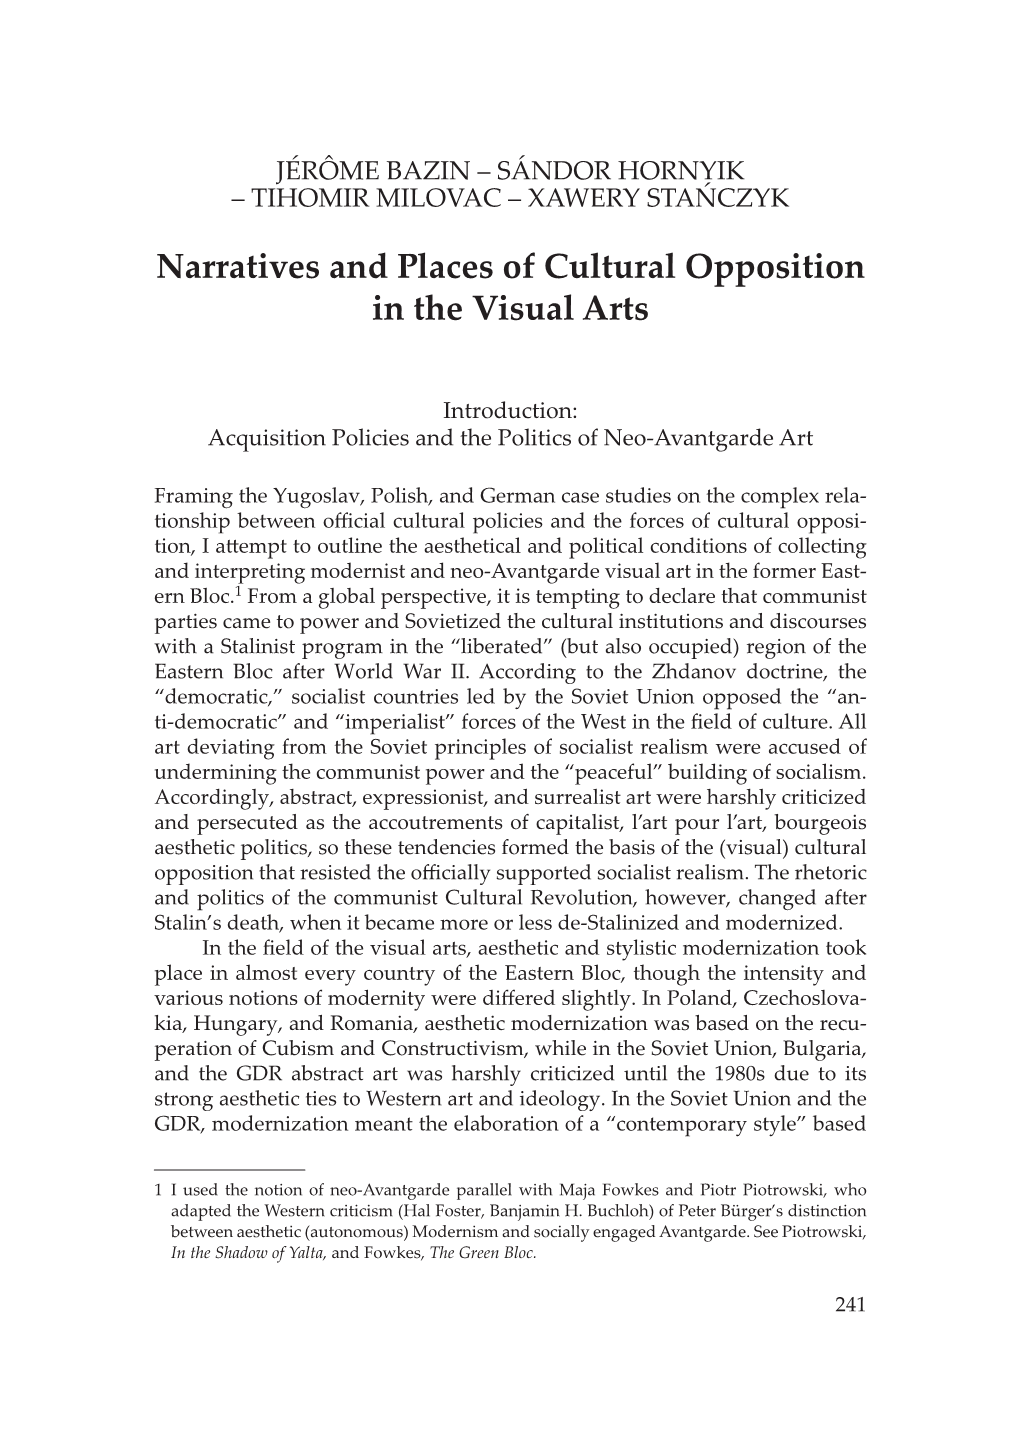 Narratives and Places of Cultural Opposition in the Visual Arts